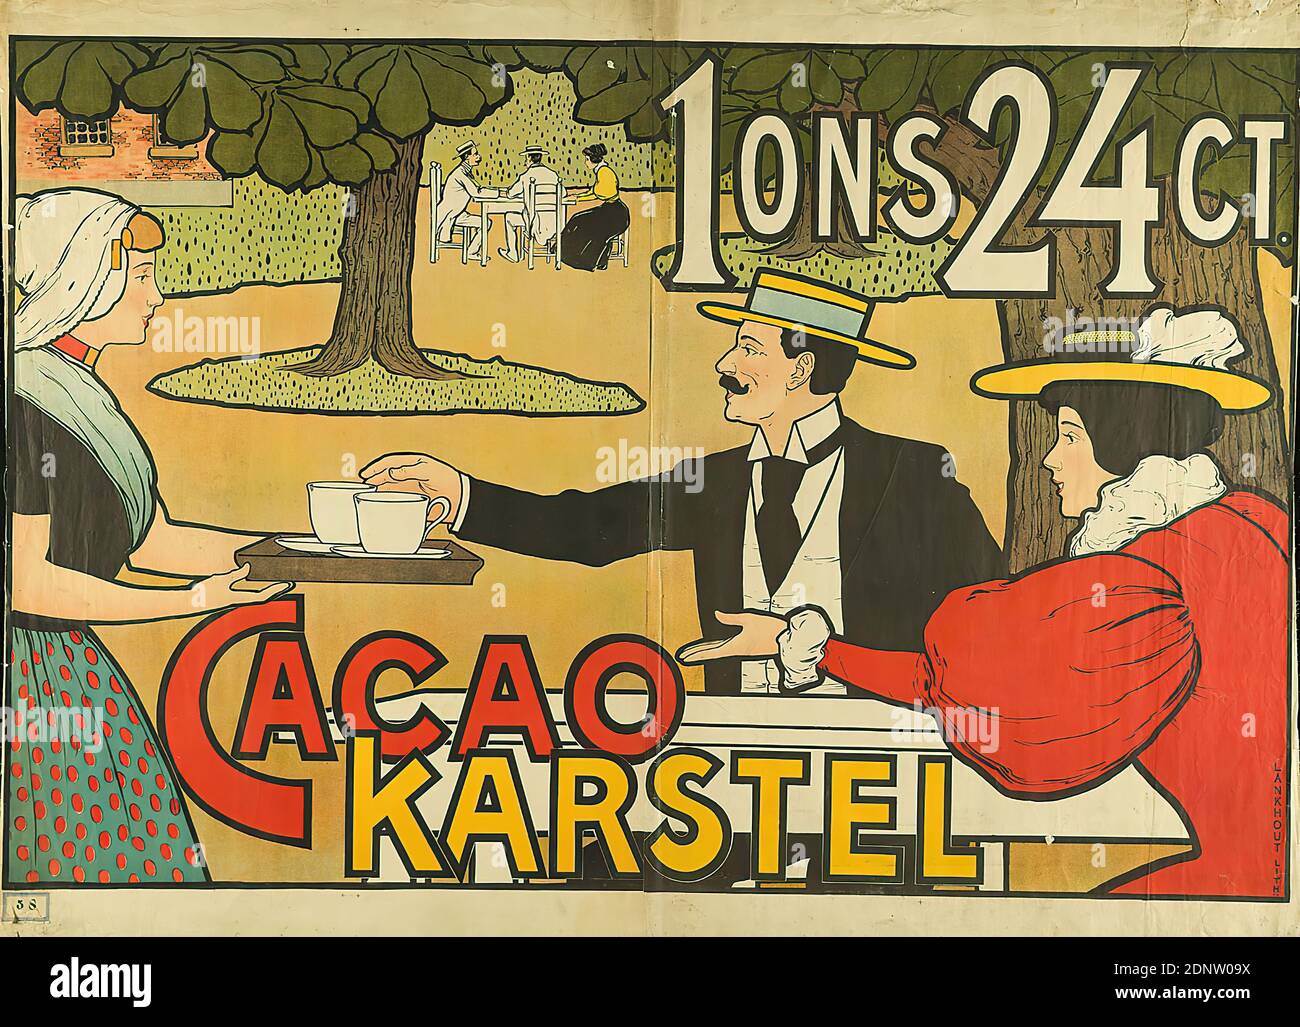 Johann van Caspel, S. Lankhout & Co, Cacao Karstel, paper, lithography, total: height: 97,3 cm; width: 132,5 cm, signed: in print bottom right: LANKHOUT LITH, product advertising (posters), terrace/tables and chairs in front of an inn, restaurant, on the sidewalk, chocolate, cocoa, inn, coffee house, pub, trees, shrubs, art nouveau Stock Photo